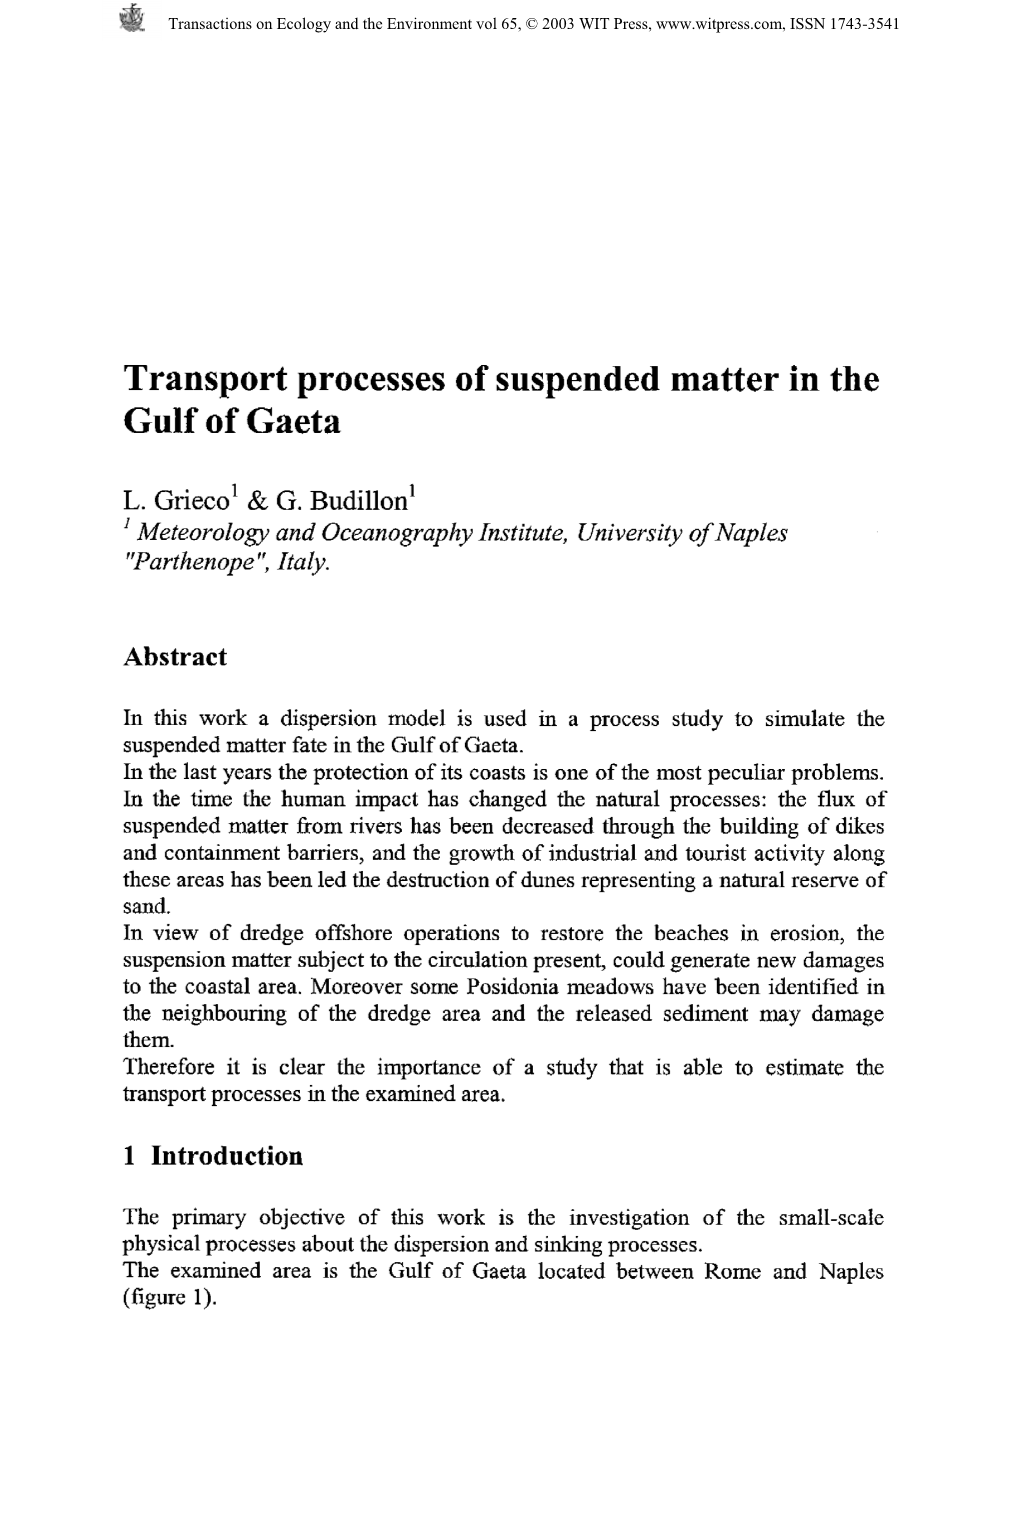 Transport Processes of Suspended Matter in the Gulf of Gaeta